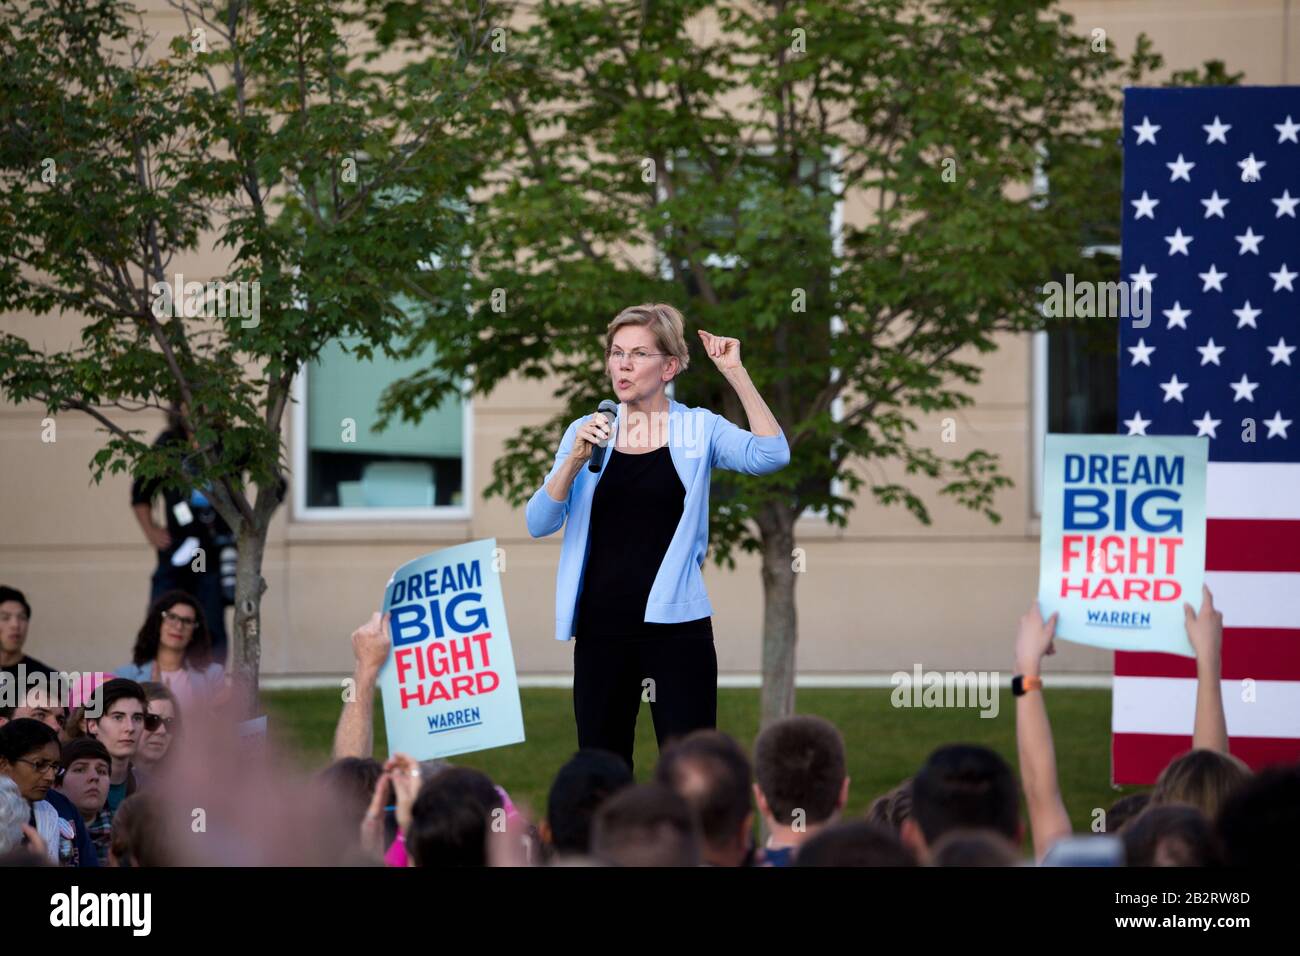 ST PAUL, UNITED STATES - Aug 19, 2019: Elizabeth Warren holds rally at Macalester College promoting her presidential campaign Stock Photo